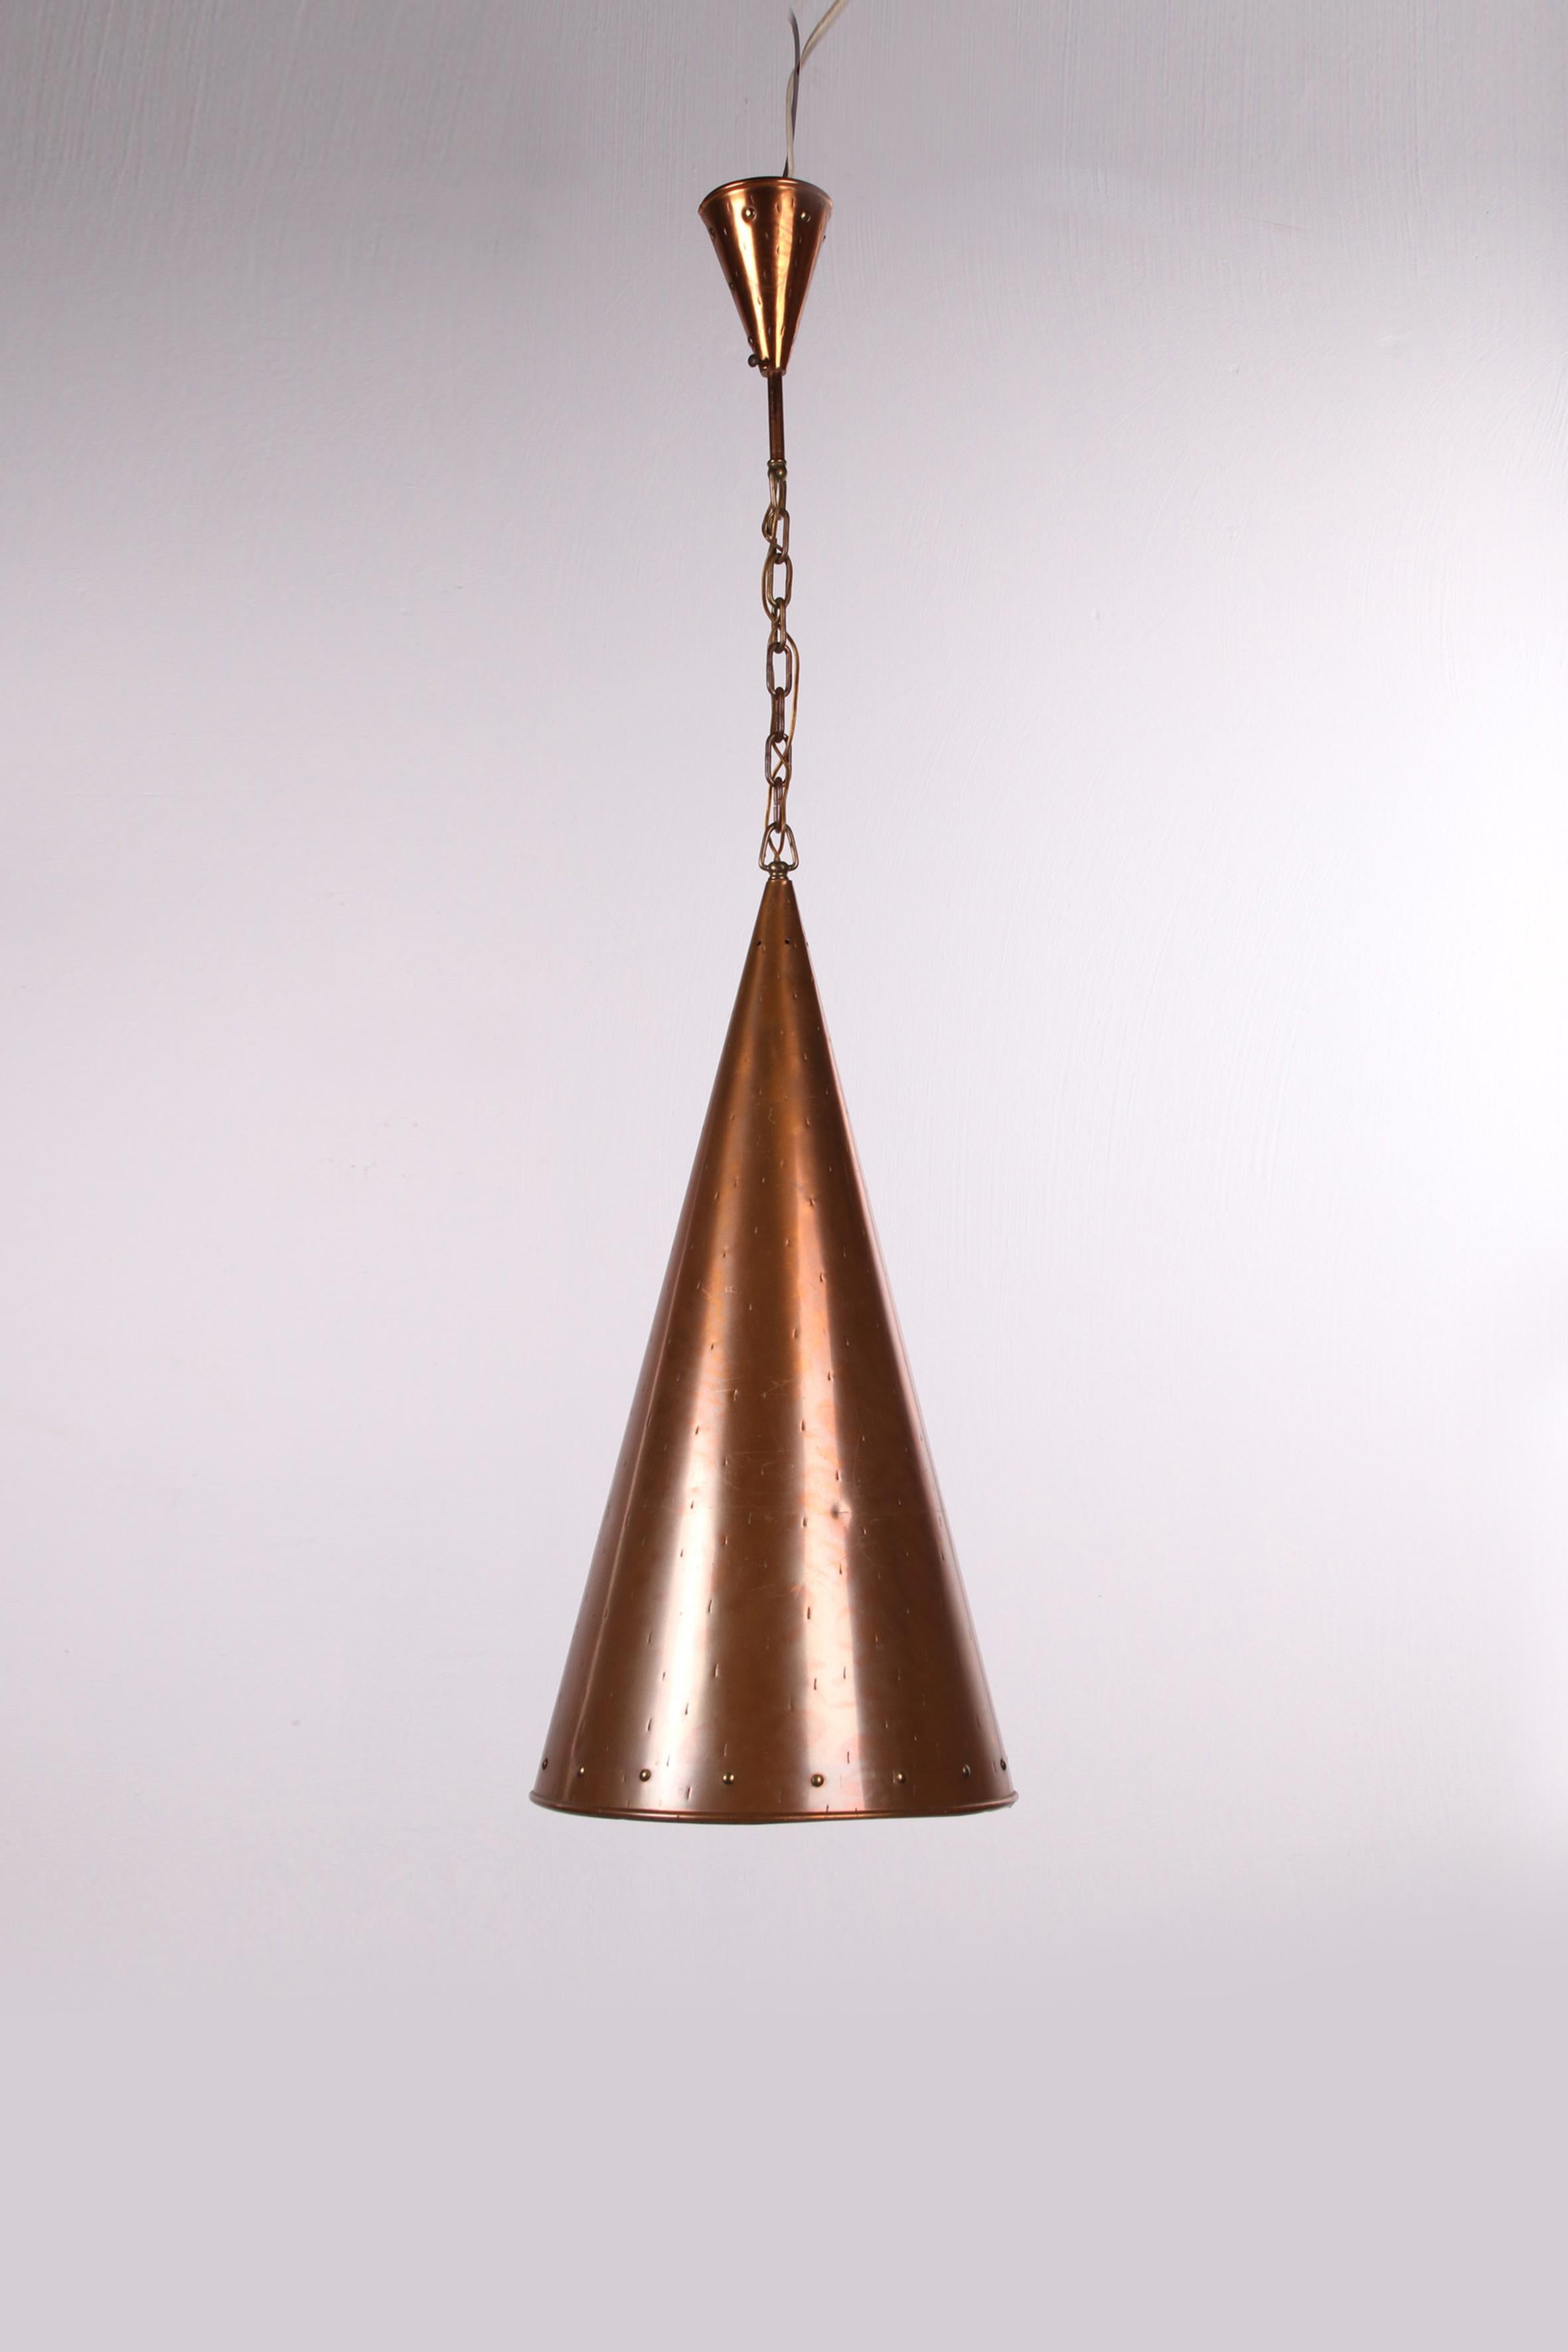 Danish Hand Hammered Copper Pendant Lamp from E.S Horn Aalestrup, 50s For Sale 9